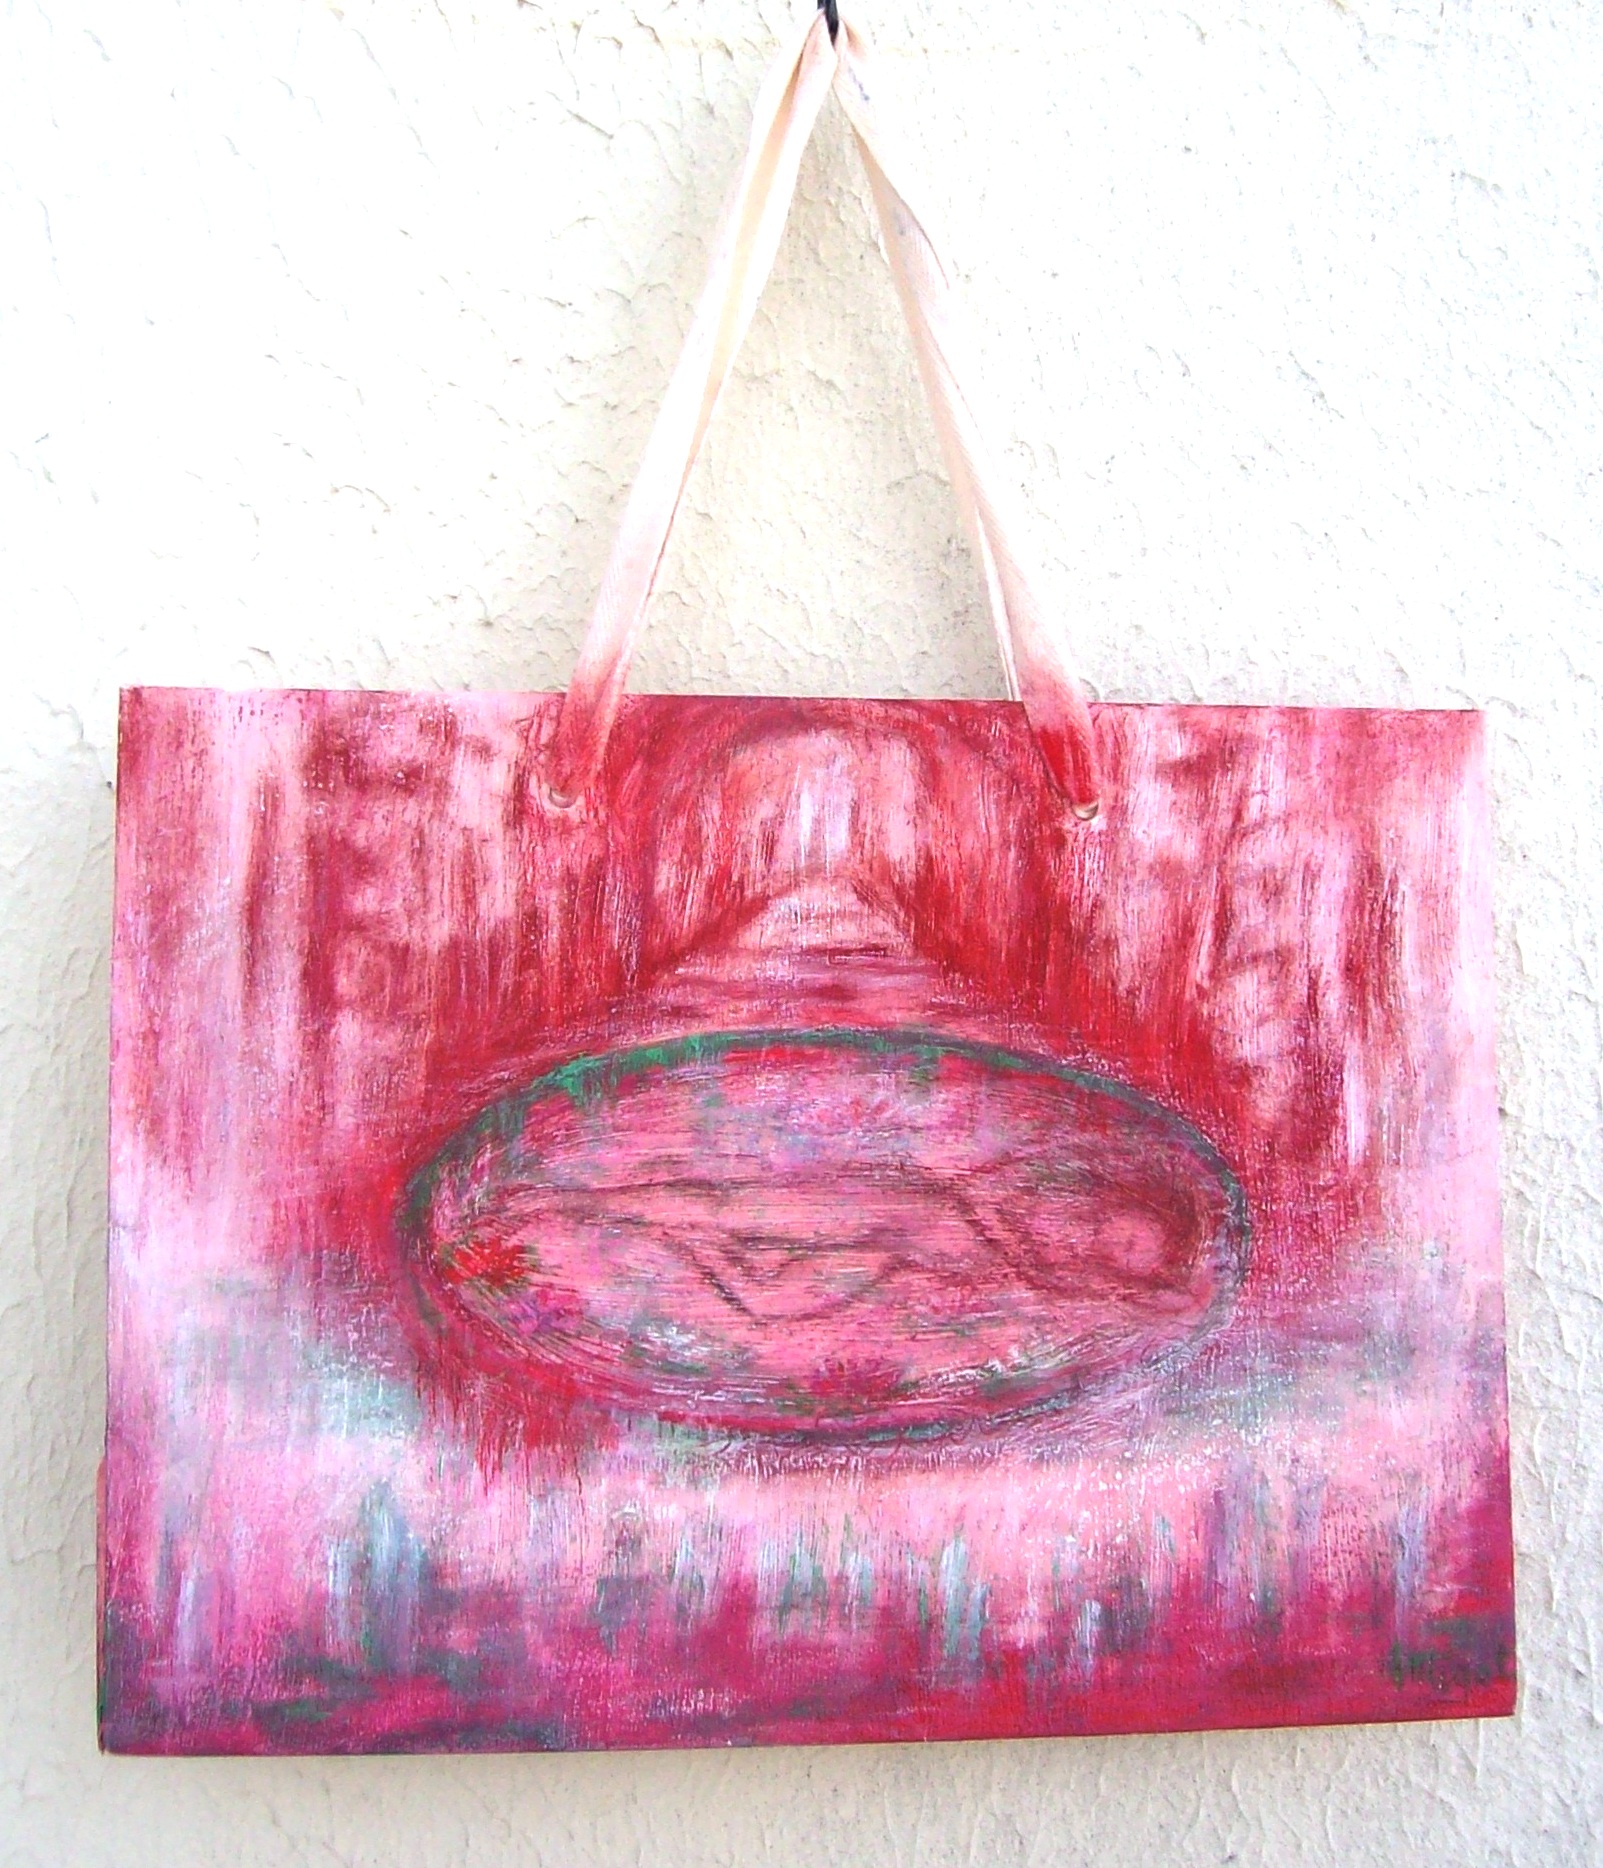 reveuse-au-corridor-dreamer-to-the-corridorl-work-on-upcycling-bag-23-x-28-cm-mixed-media1